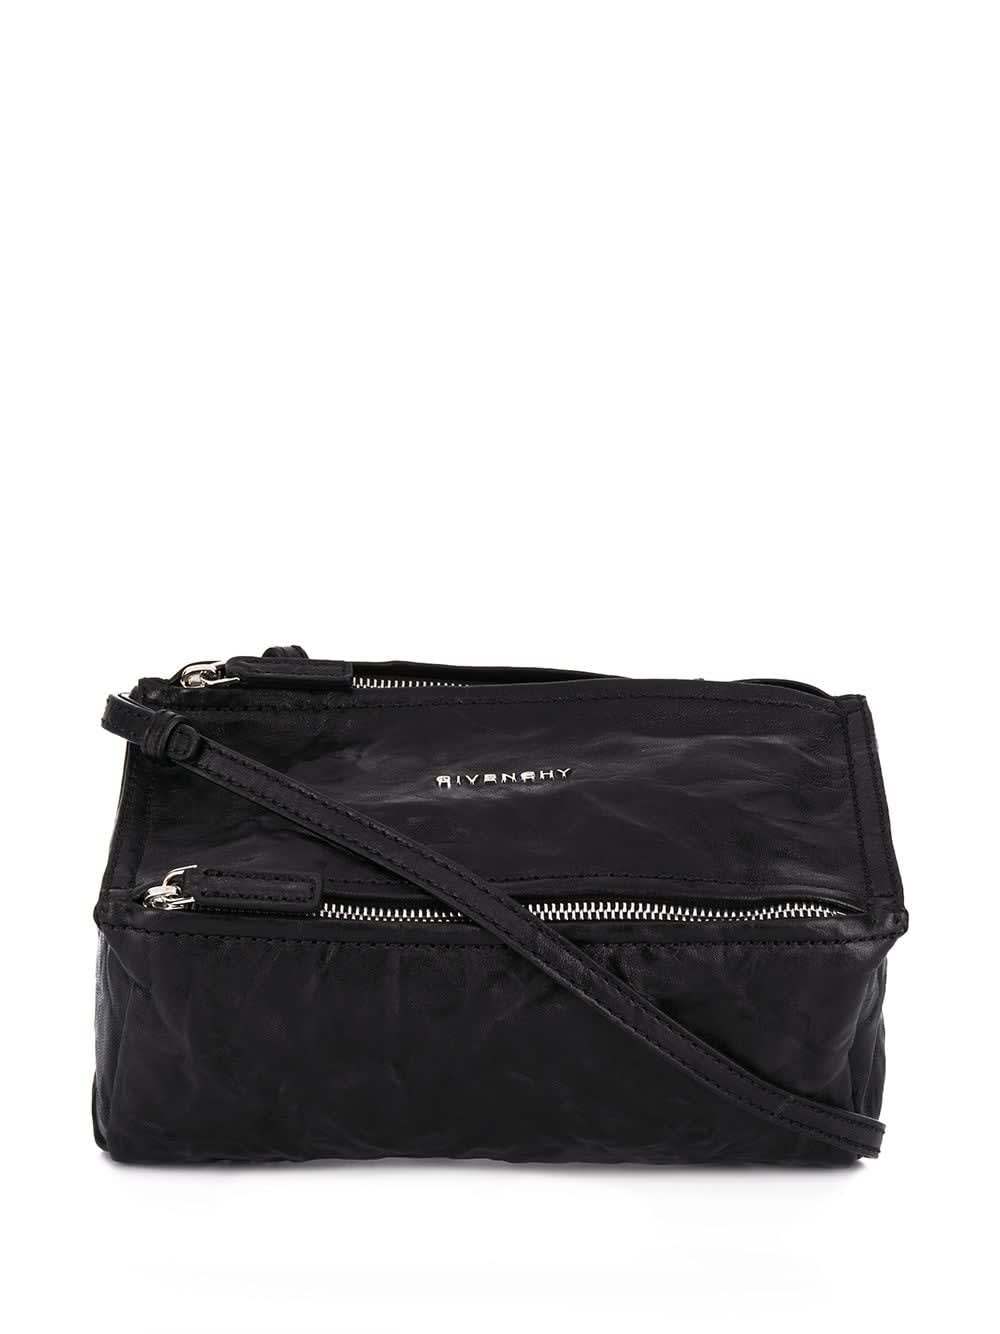 Givenchy Pandora Mini Bag In Aged Black Leather